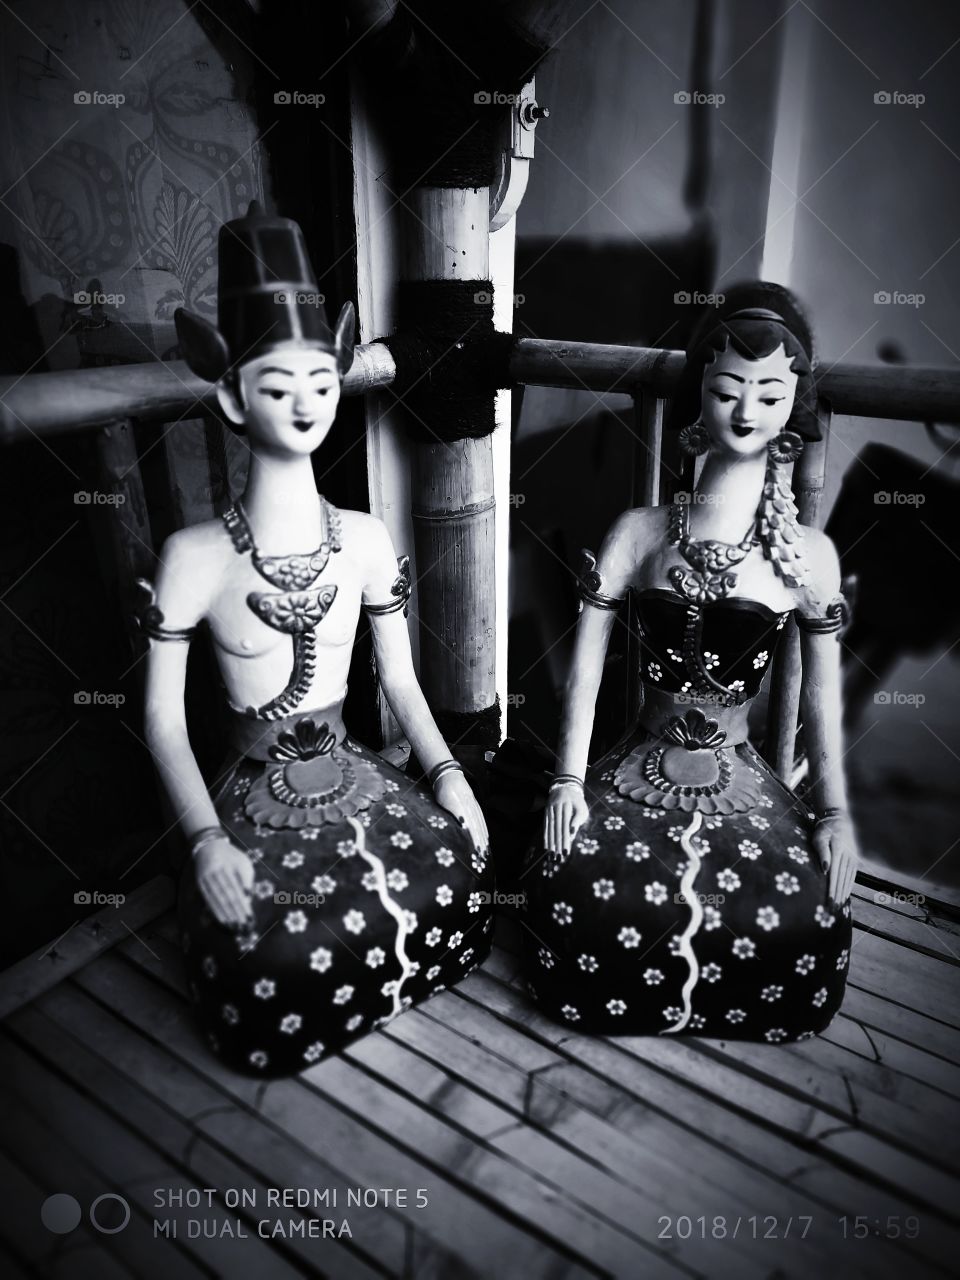 statue of traditional Javanese traditional clothing